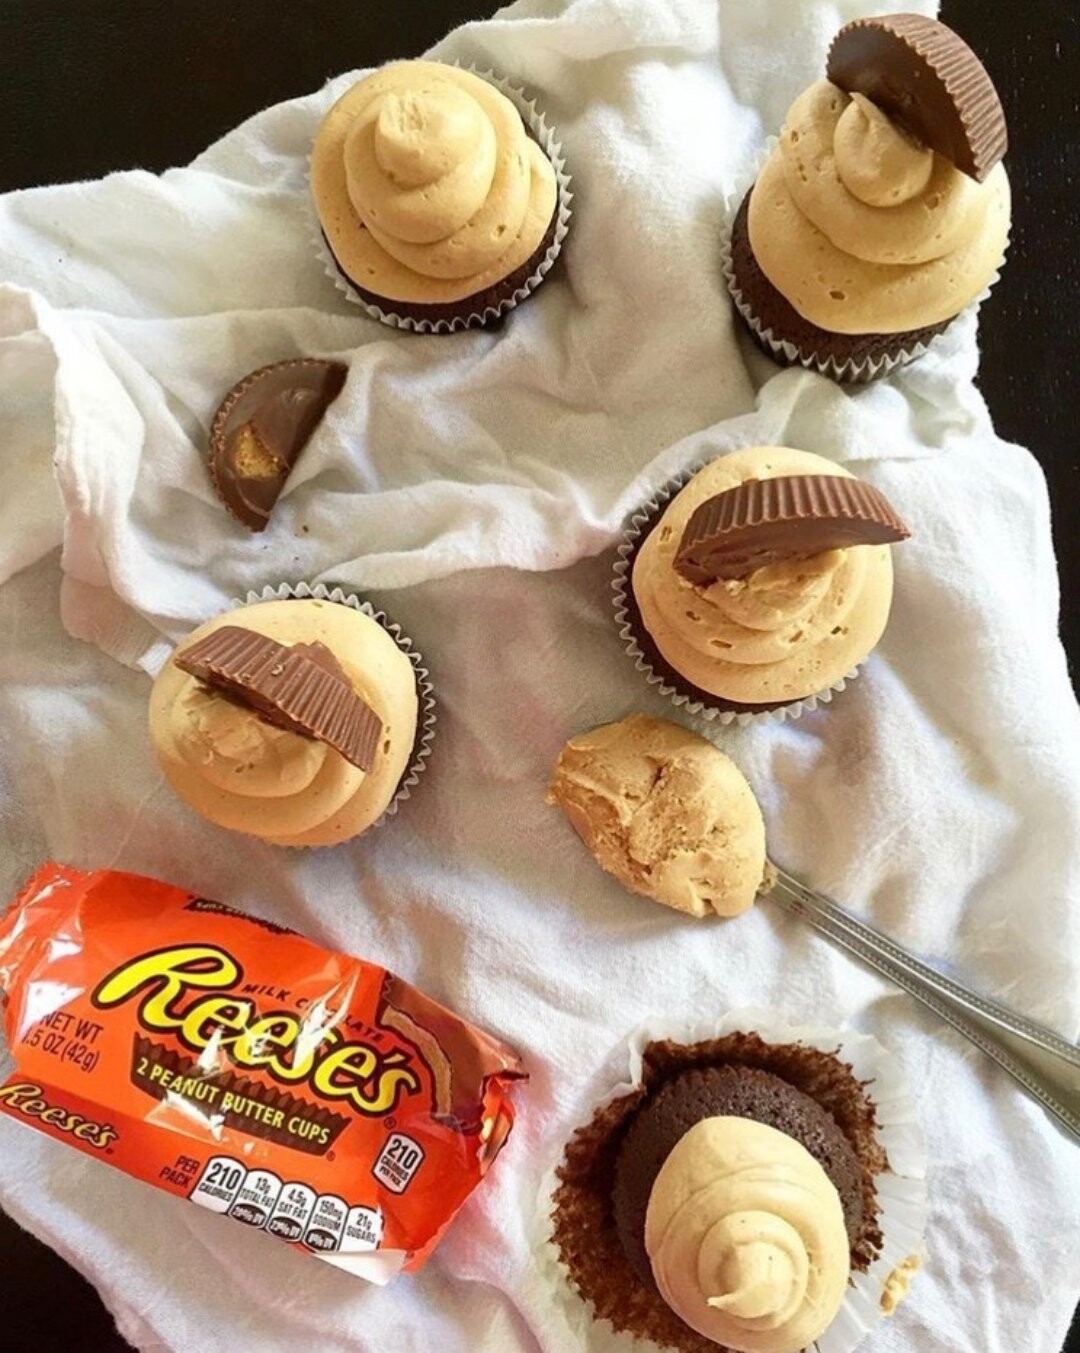 As my taste buds were trying to adapt to peanut butter,I felt  it was mandatory to try the most classic flavor combination:peanut butter and chocolate. Gluten free brownie cupcakes with smooth and airy peanut butter frosting,topped with peanut butter cups! <br />
